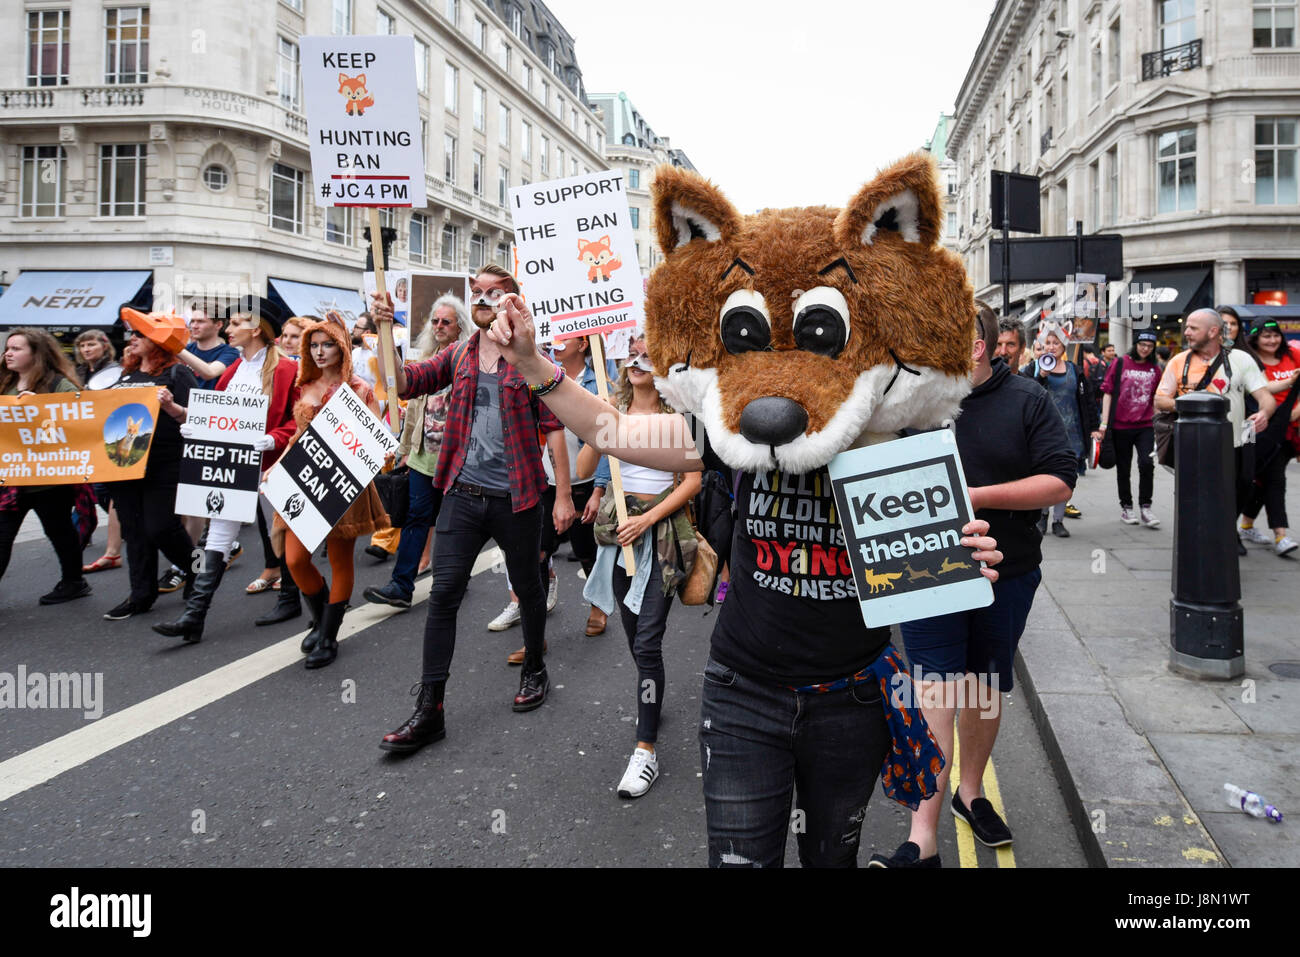 London, UK. 29th May, 2017. Demonstrators stage an 'Anti-Hunting March' in central London, marching from Cavendish Square to outside Downing Street. Protesters are demanding that the ban on fox hunting remains, contrary to reported comments by Theresa May, Prime Minister, that the 2004 Hunting Act could be repealed after the General Election. Credit: Stephen Chung/Alamy Live News Stock Photo